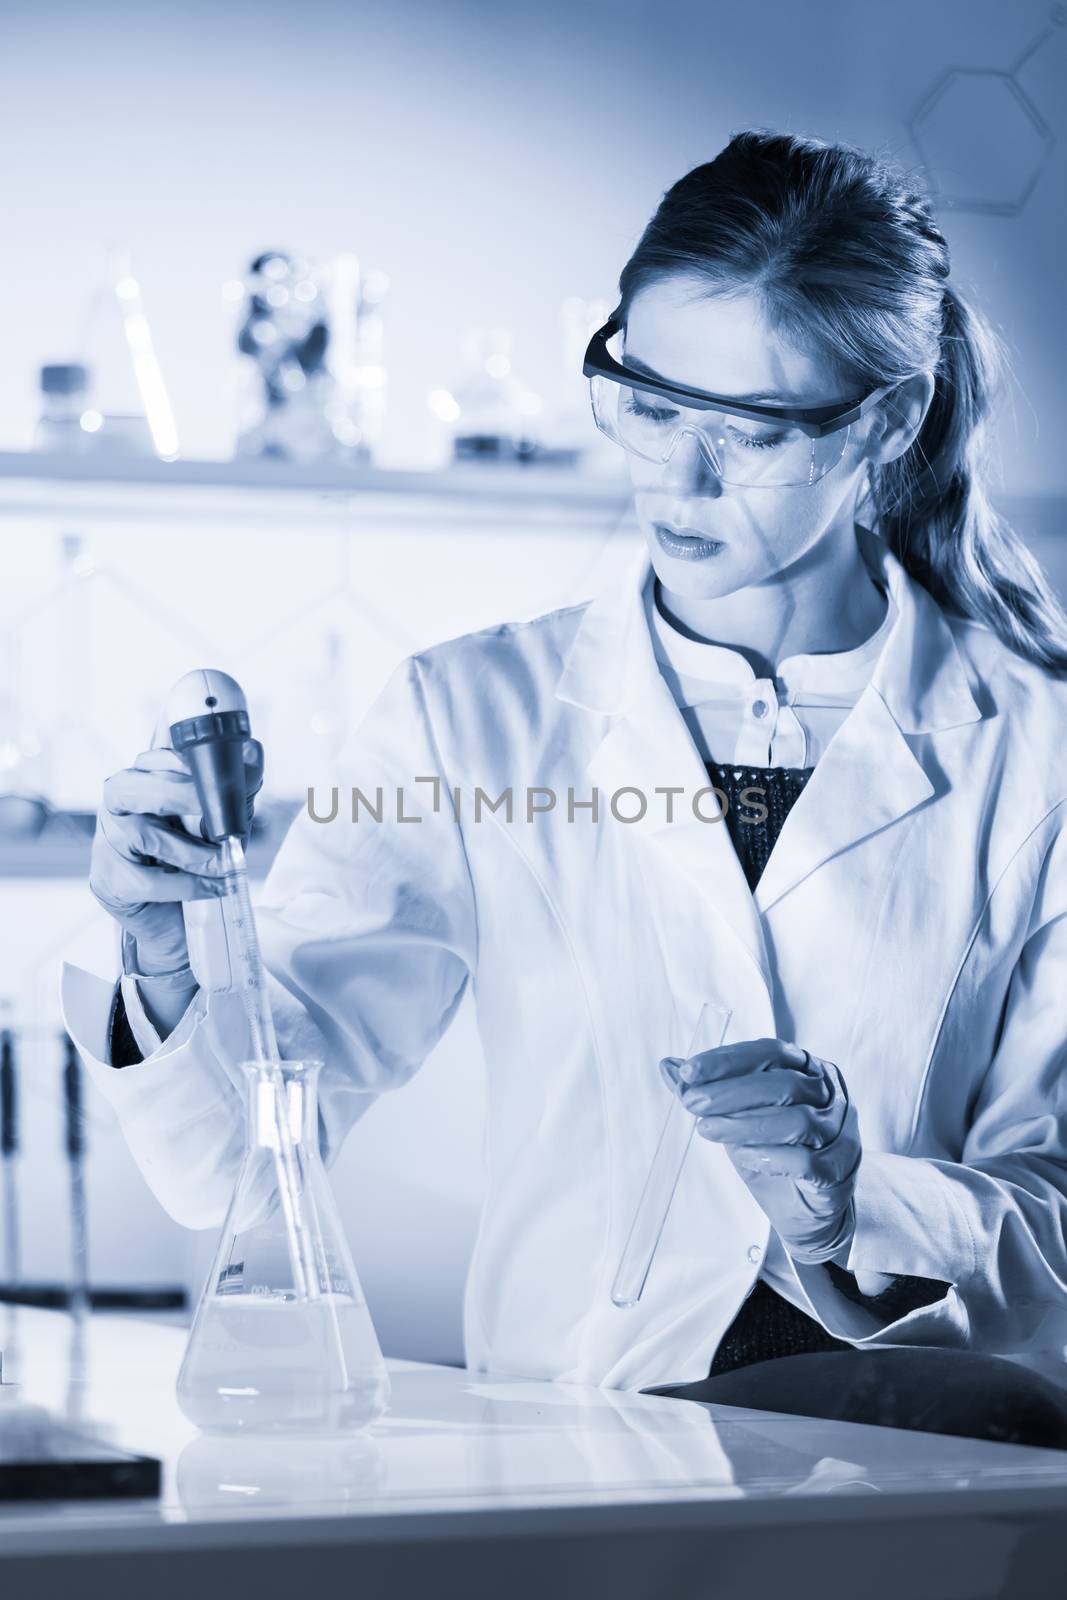 Life scientists researching in laboratory. Focused female life science professional pipetting solution into the glass cuvette. Healthcare and biotechnology concept. Blue toned image.